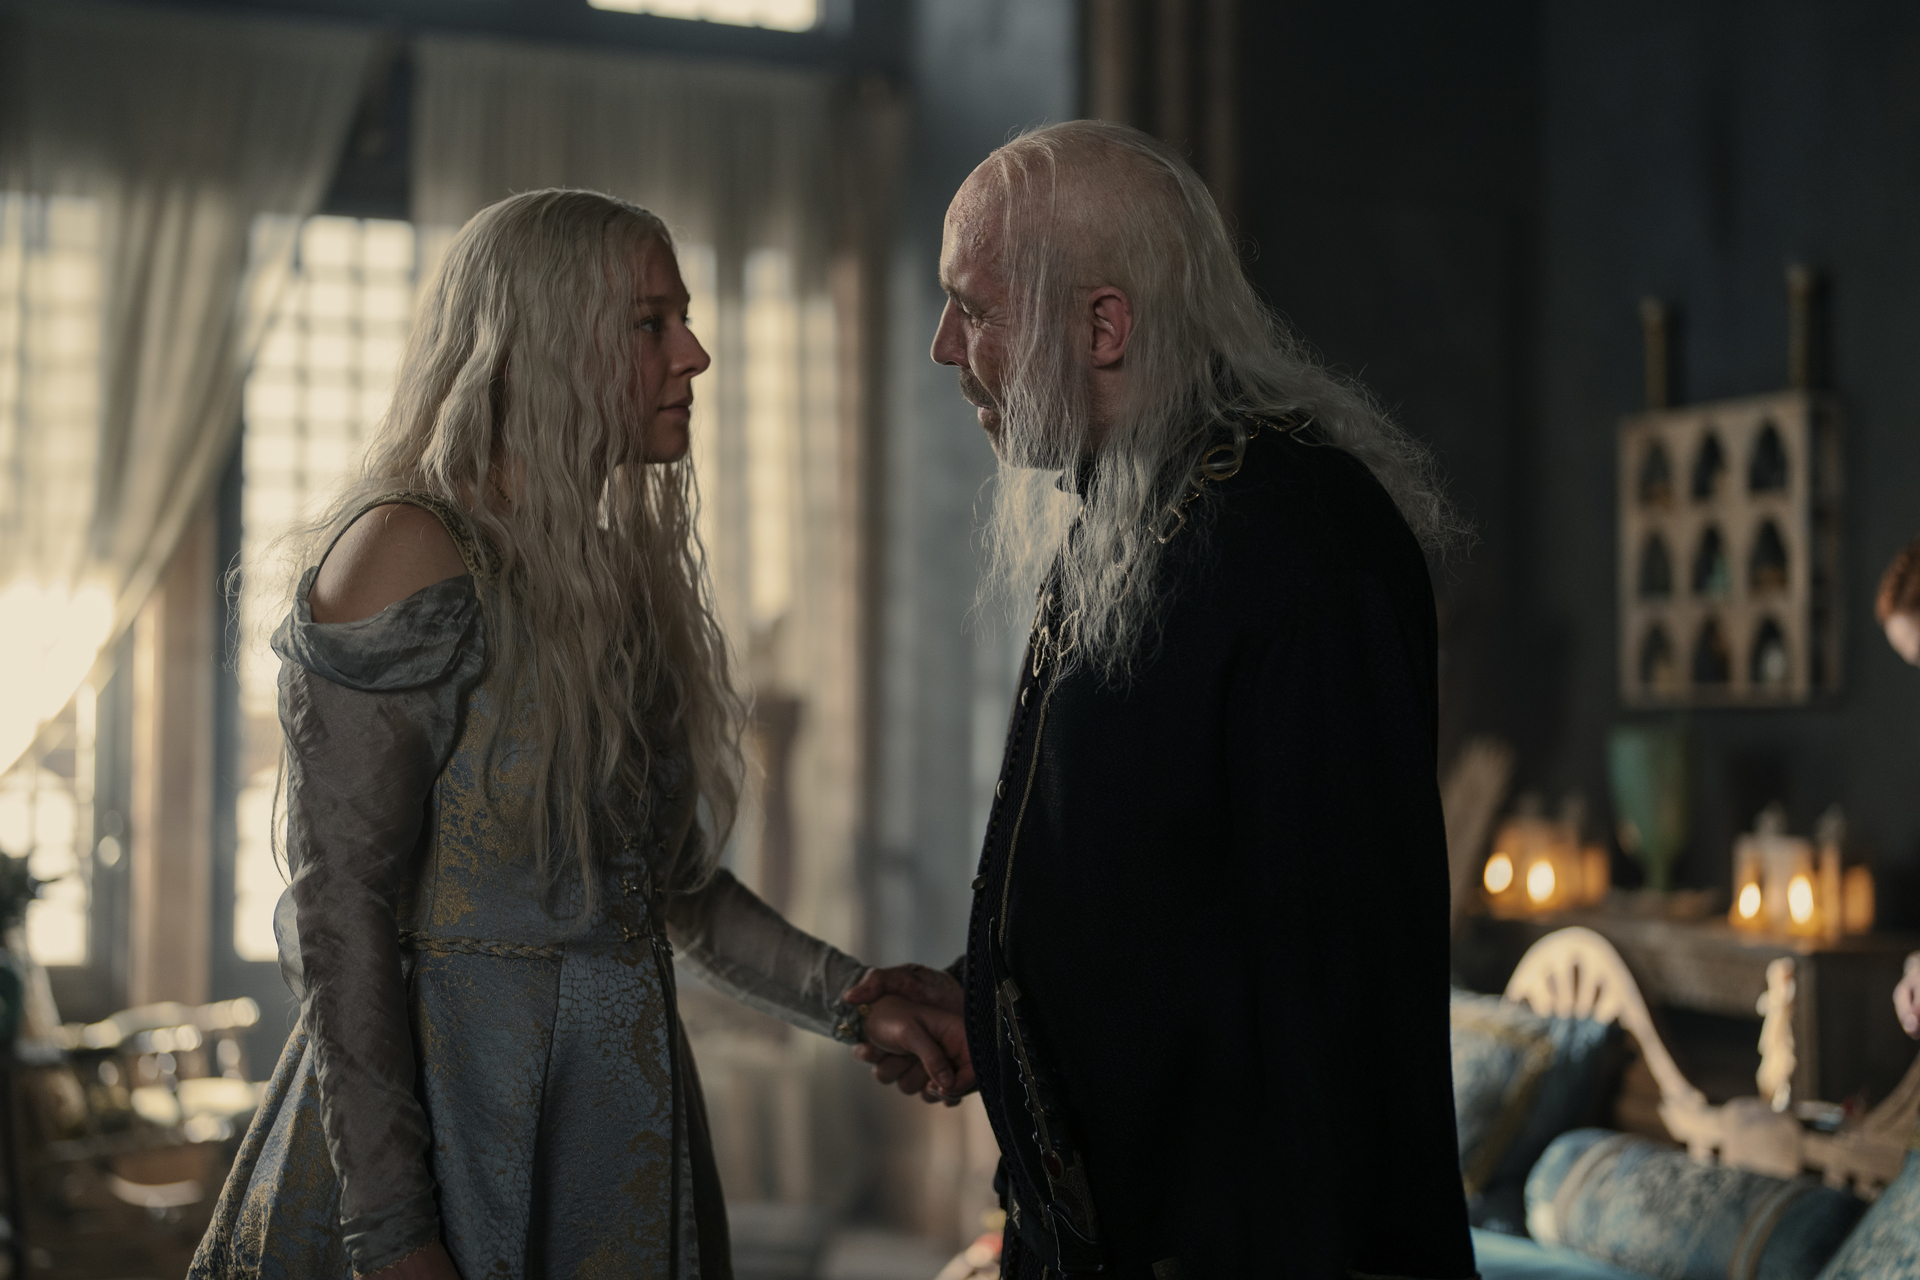 Thaenyra Targaryen (Emma D'Arcy) and Viserys (Paddy Considine) in Episode 6 of House of the Dragon, which features a significant time skip